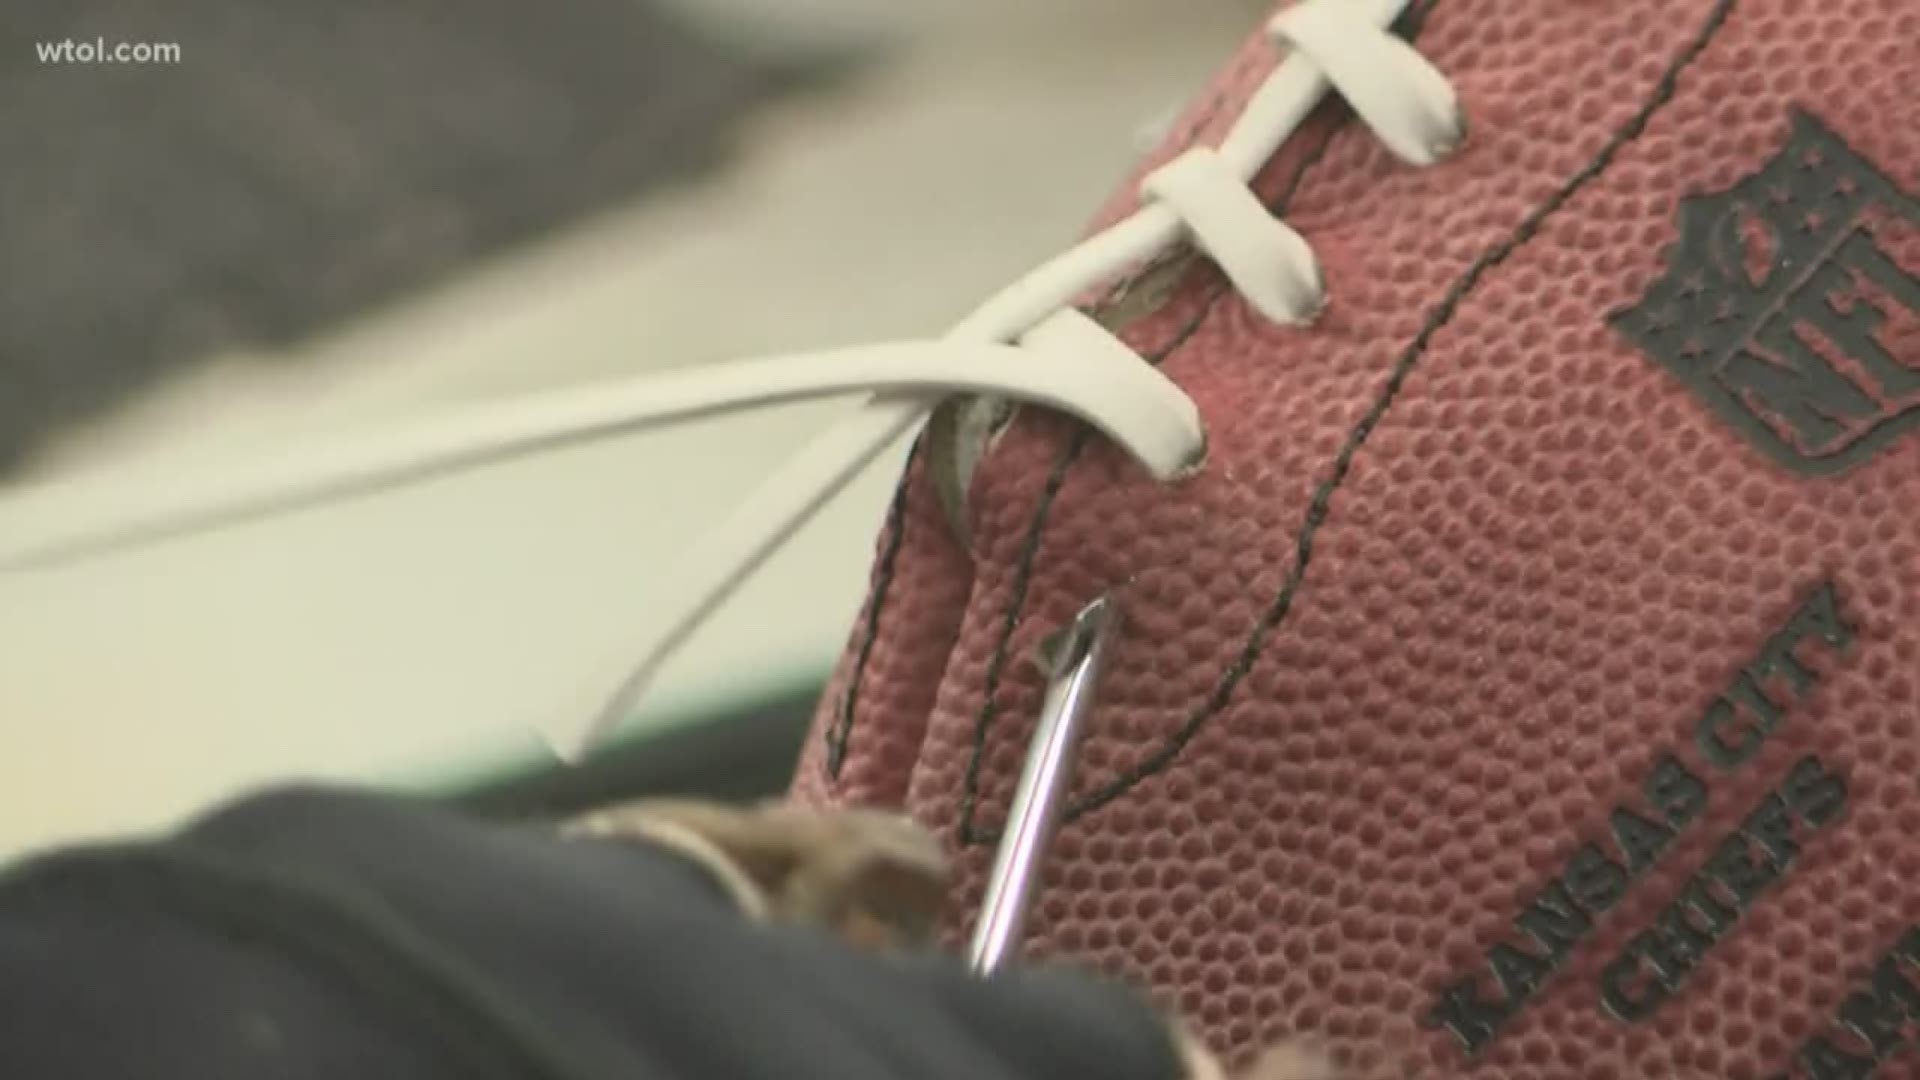 The Wilson Sporting Goods plant in Ada has been making NFL footballs since 1955.